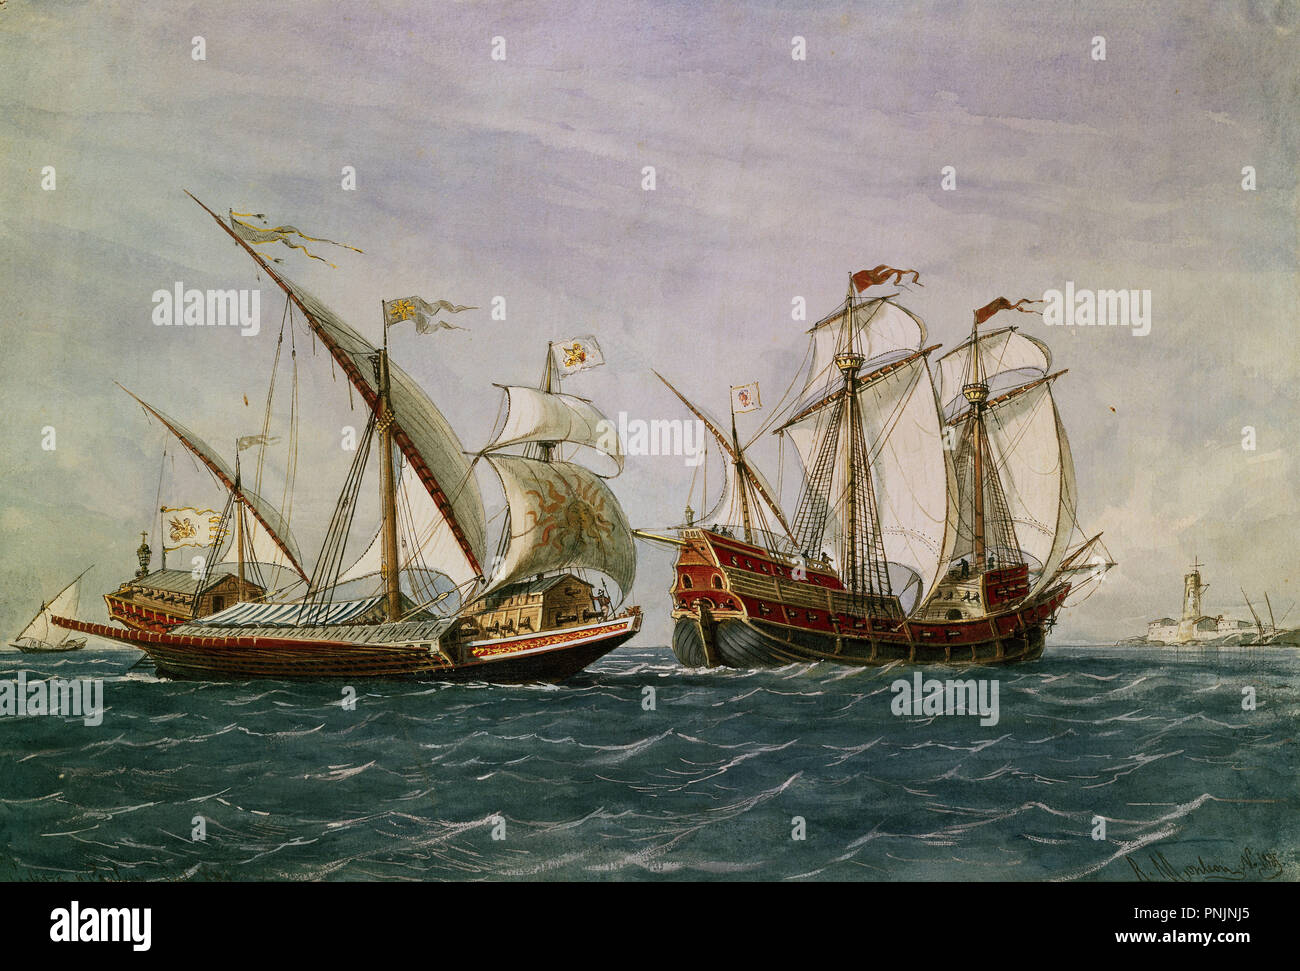 Galeass With Paddles and Galleon. 16th century. Madrid, musée naval. Author: MONLEON, RAFAEL. Location: MUSEO NAVAL / MINISTERIO DE MARINA. MADRID. SPAIN. Stock Photo